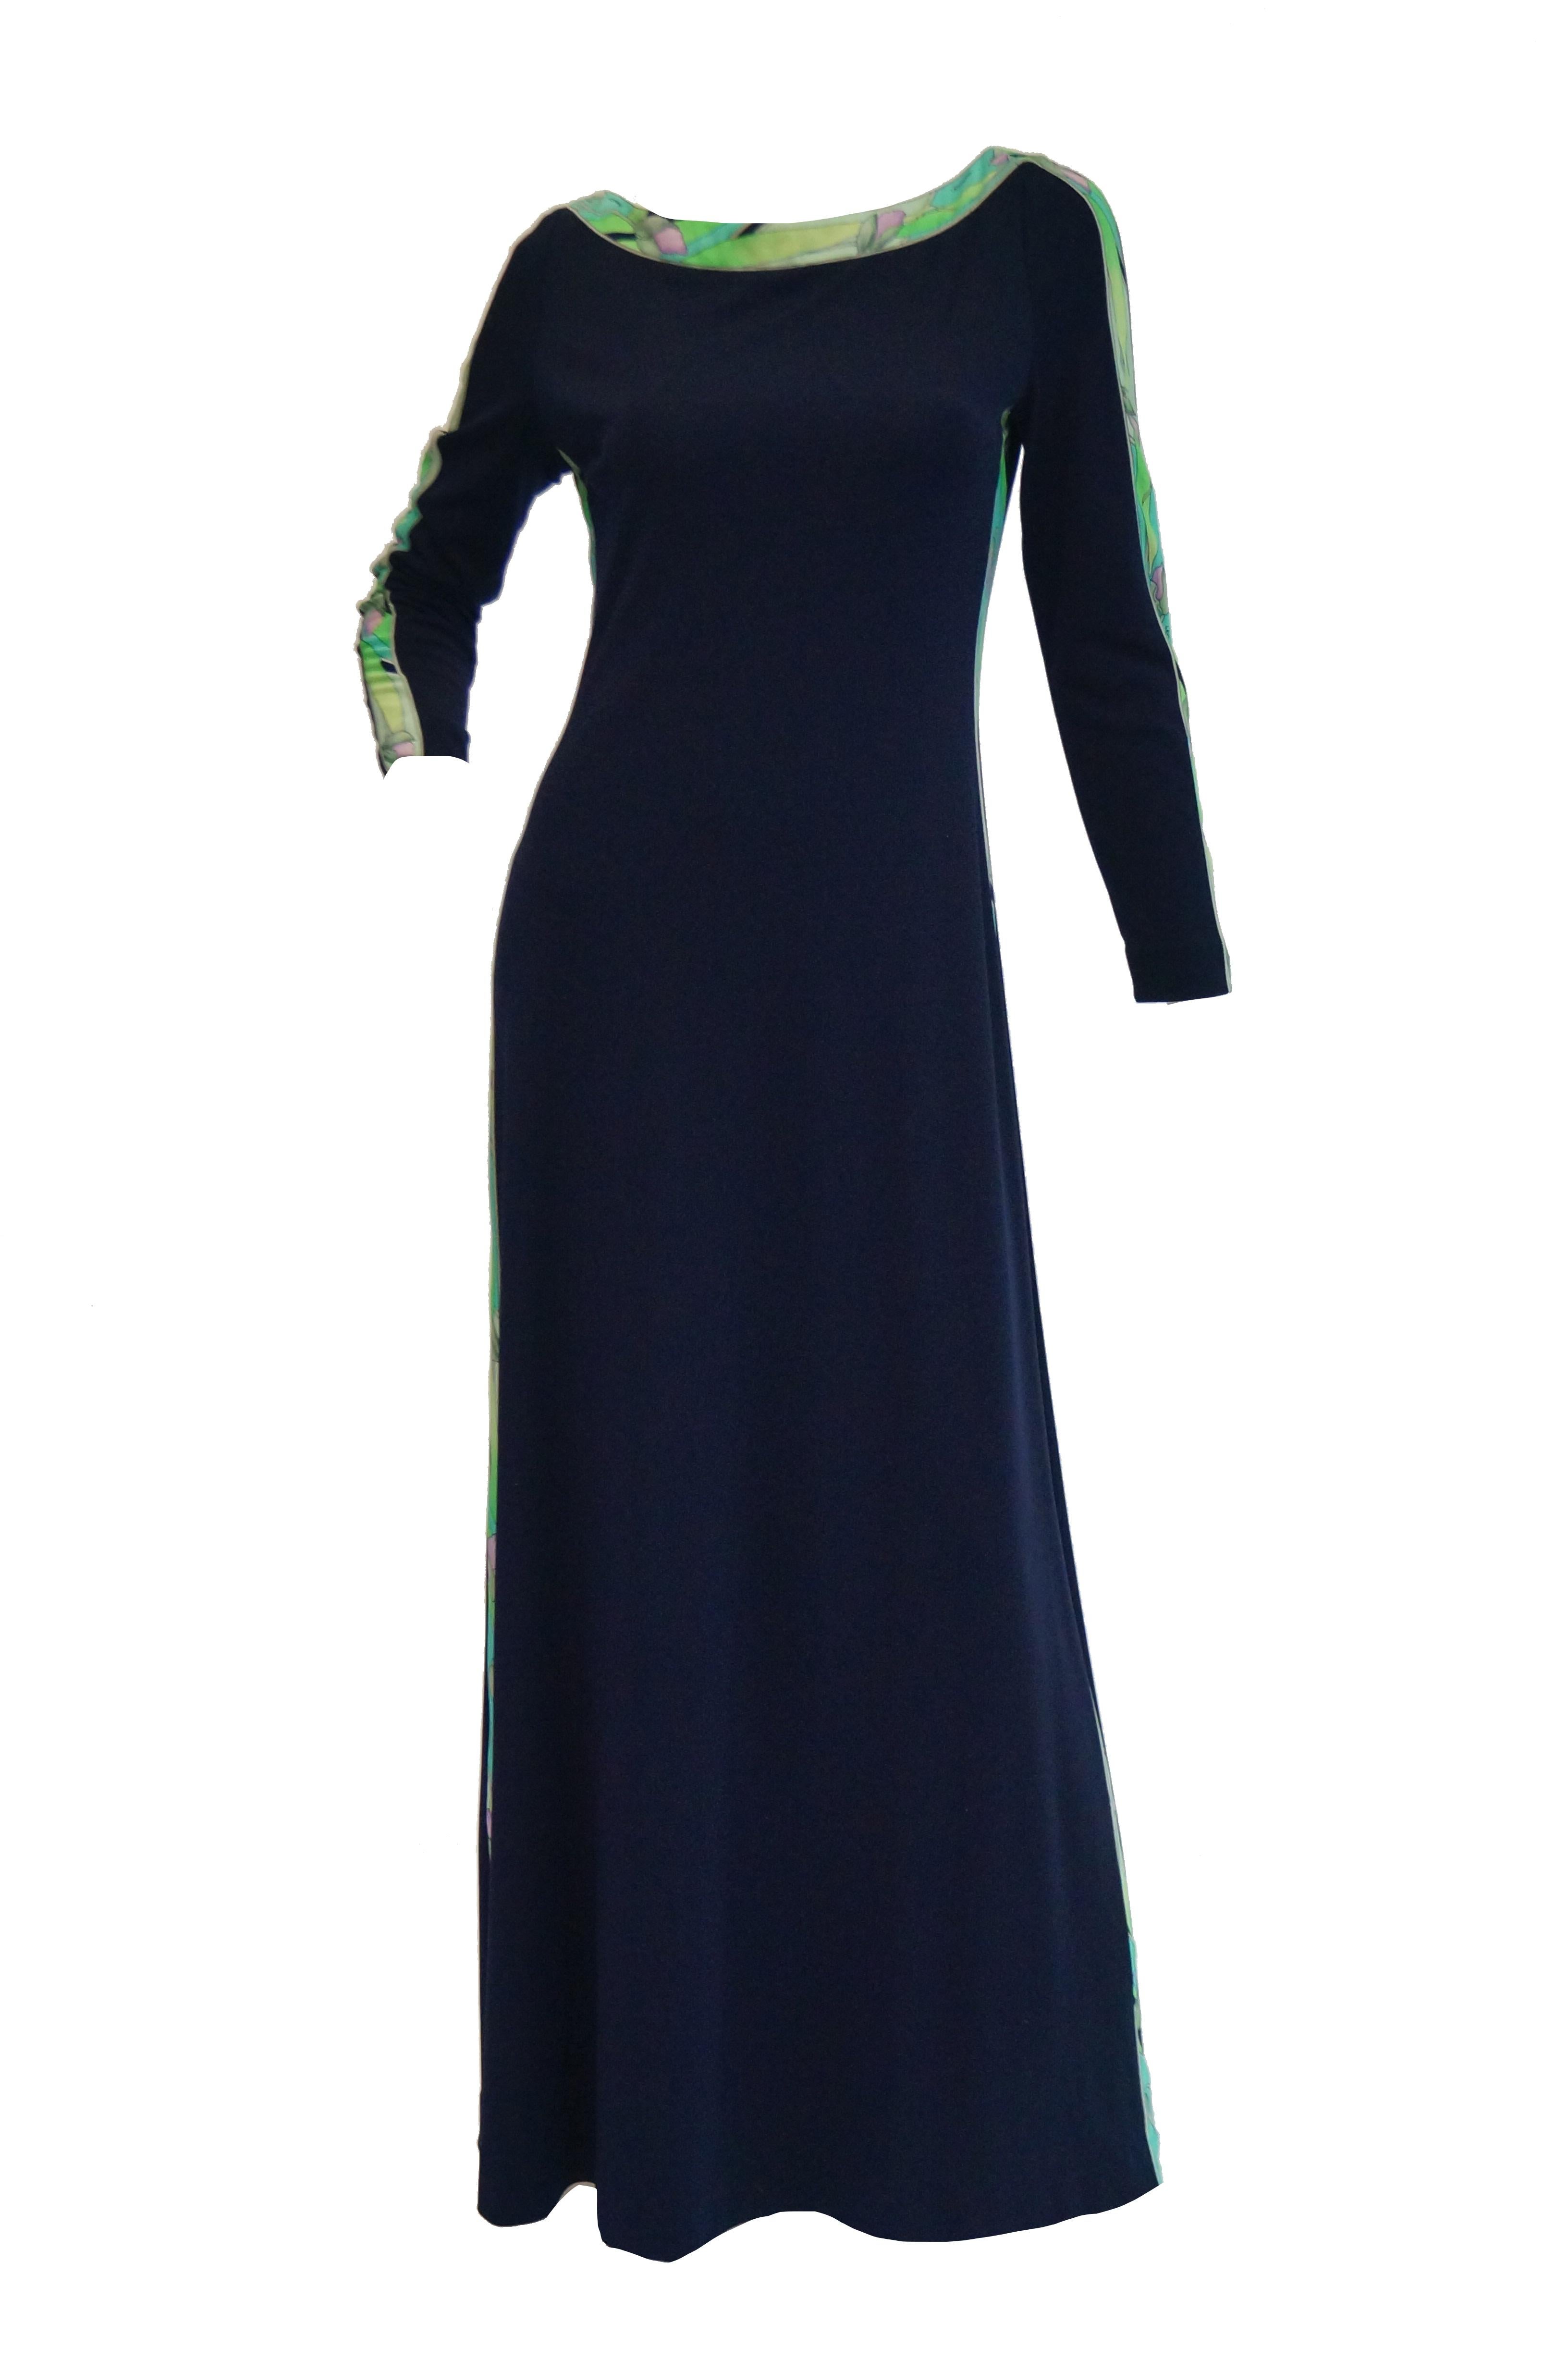 1960s Leonard Black Knit Maxi Dress with Green Floral Contrast 7